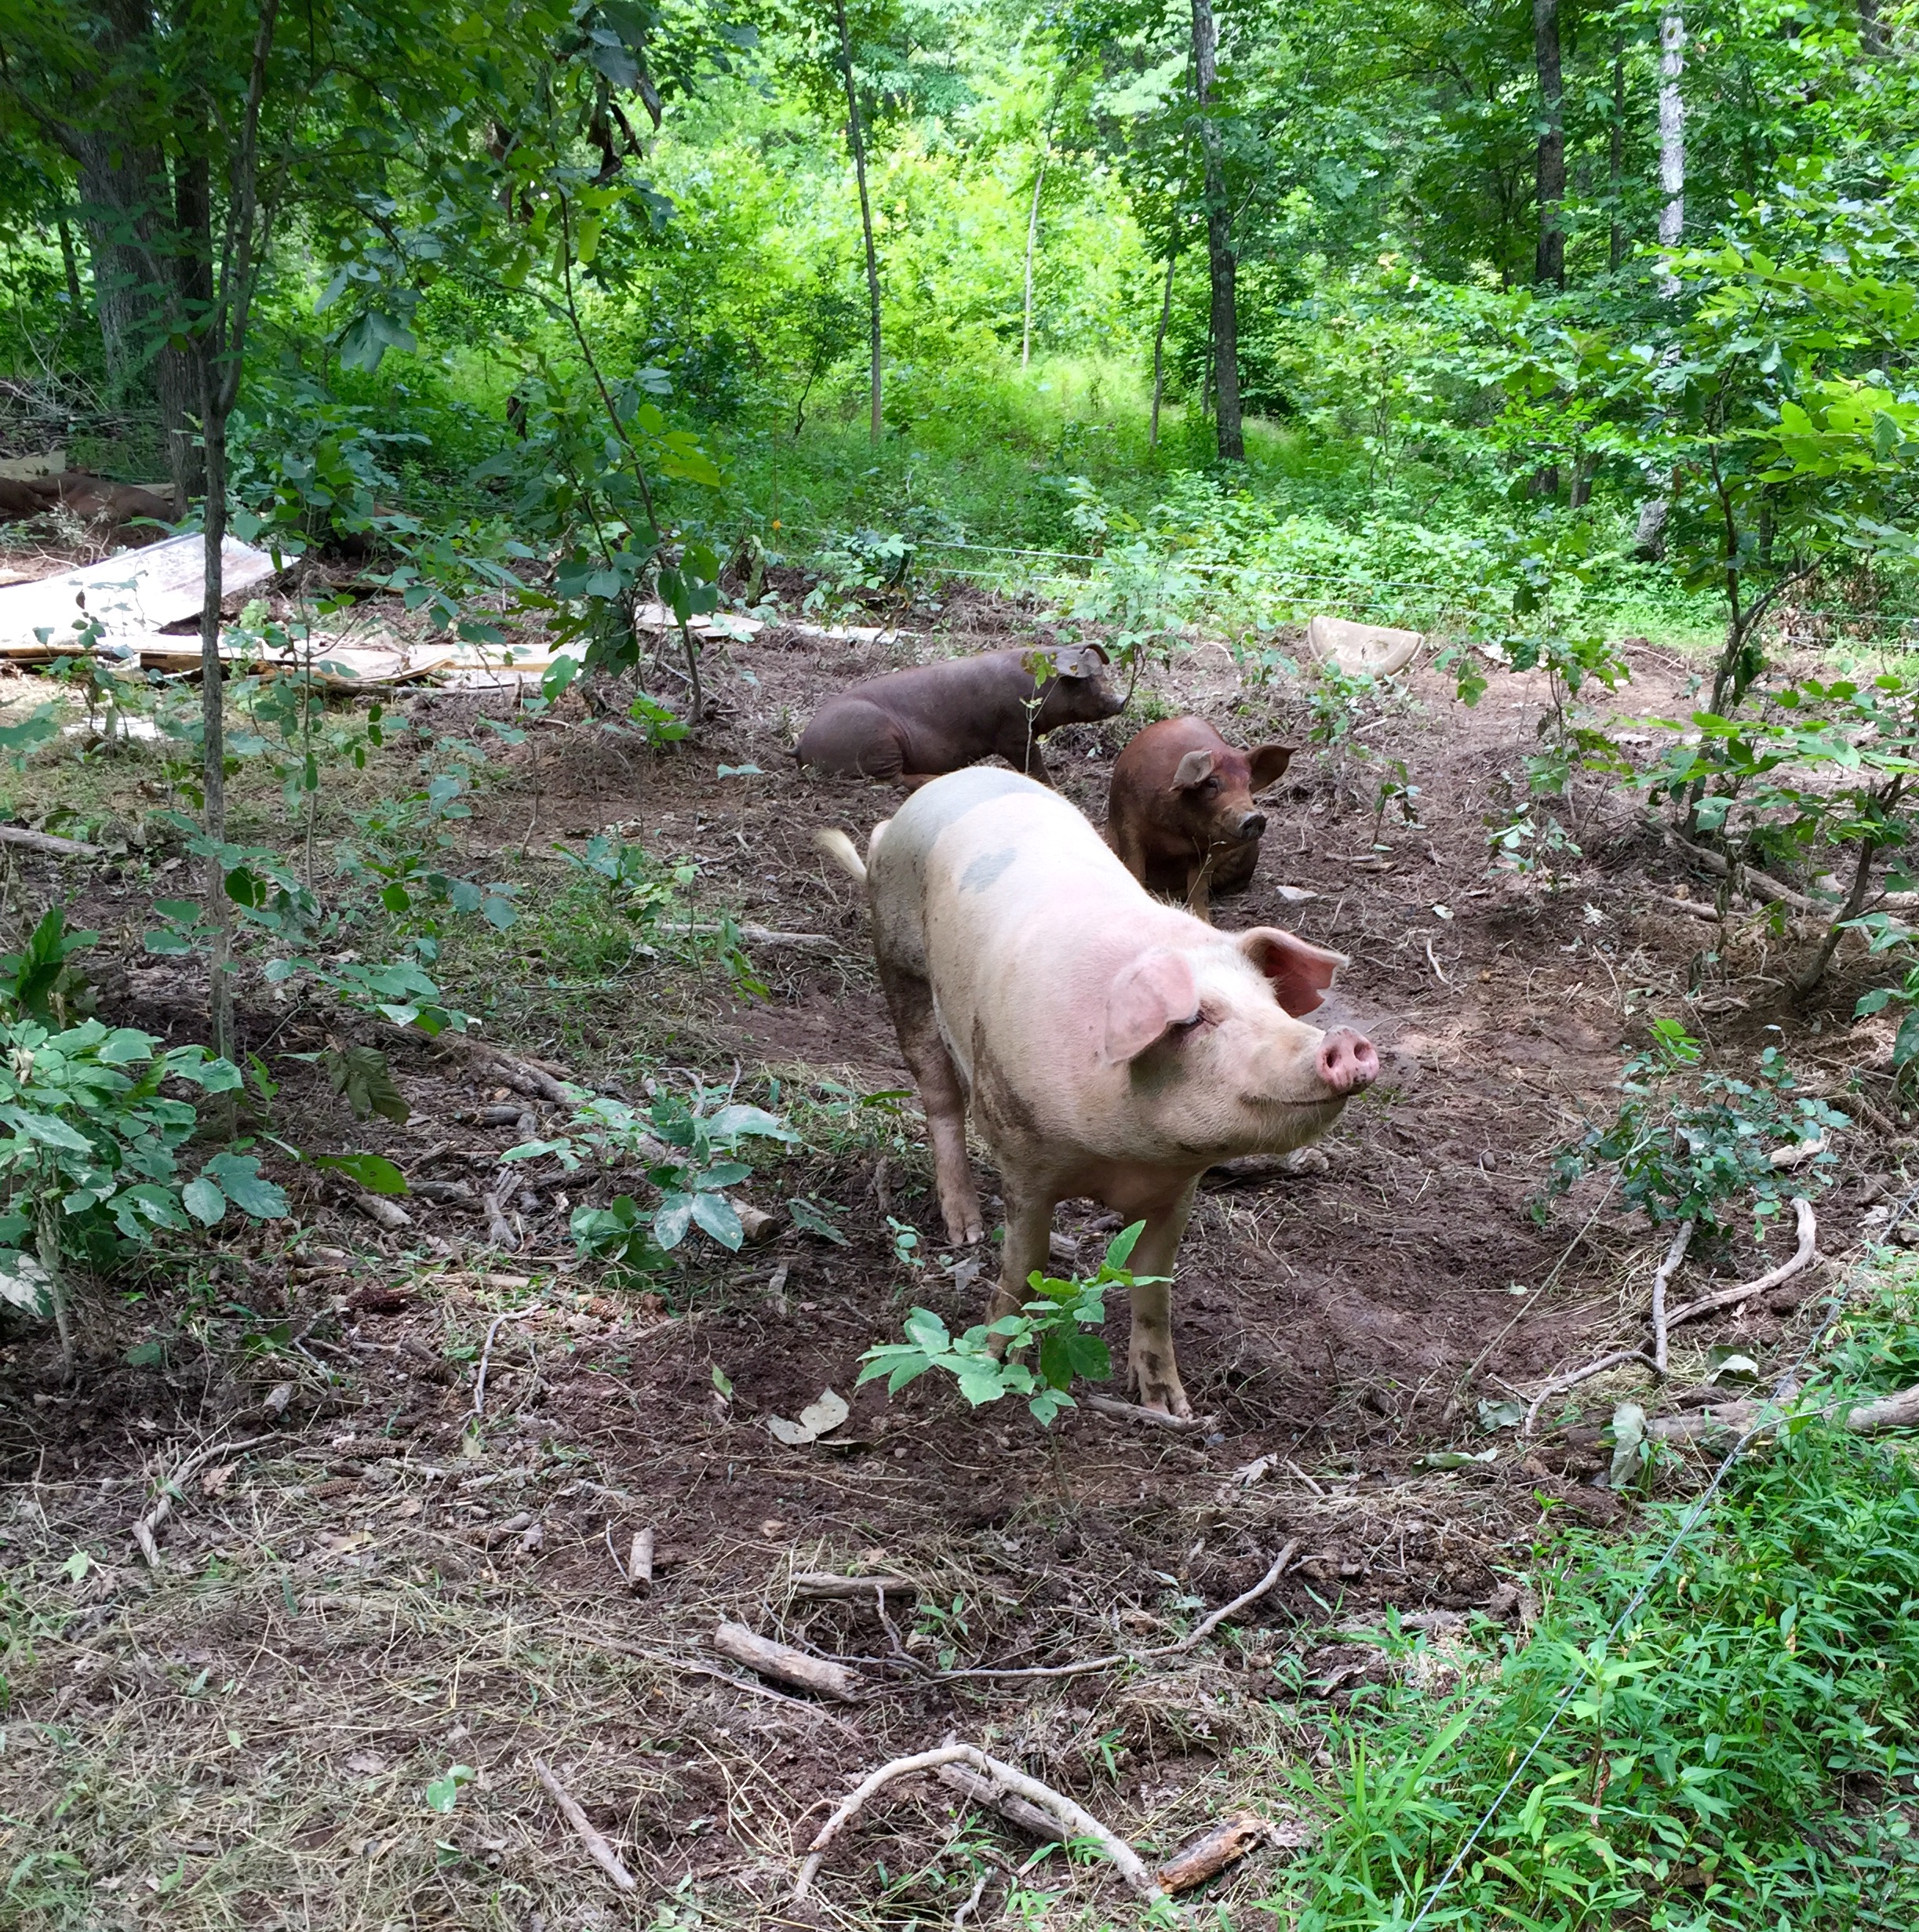 Mast's hogs feed on hickory nuts in the wood lot.